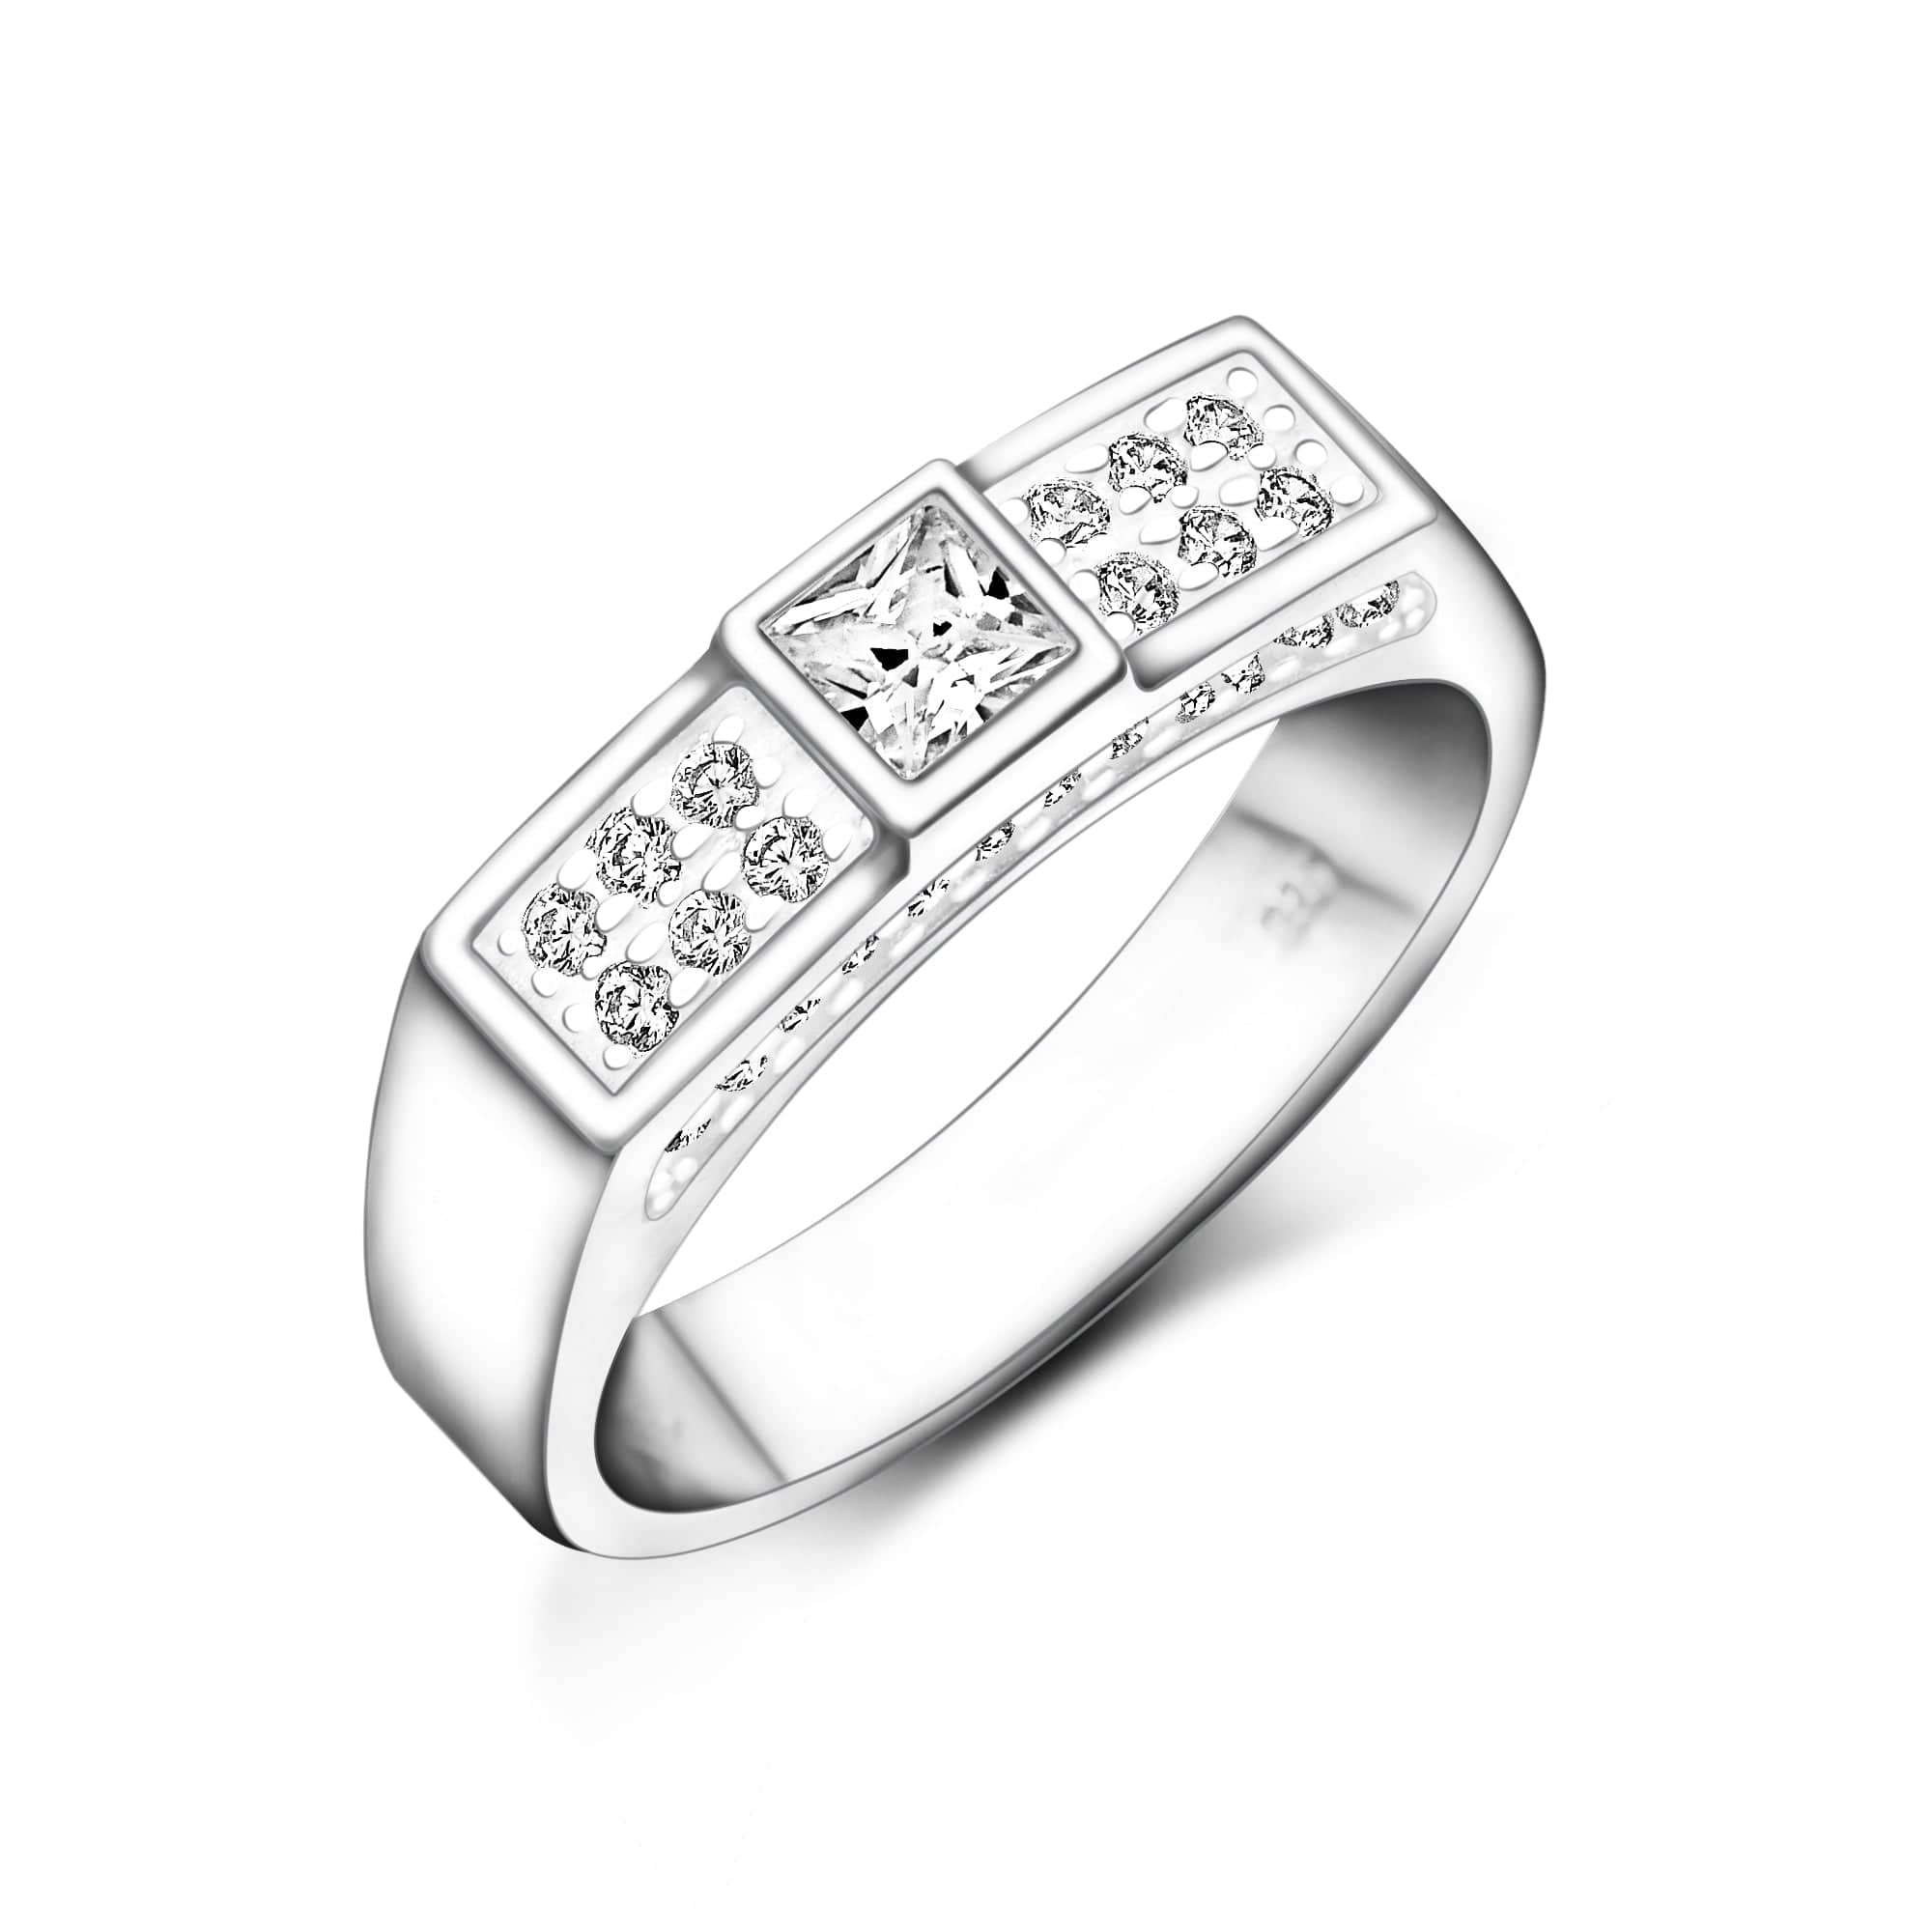 Luxury Male ring Big CZ Diamond 925 Sterling Silver Engagement Wedding Band  rings For men Fine